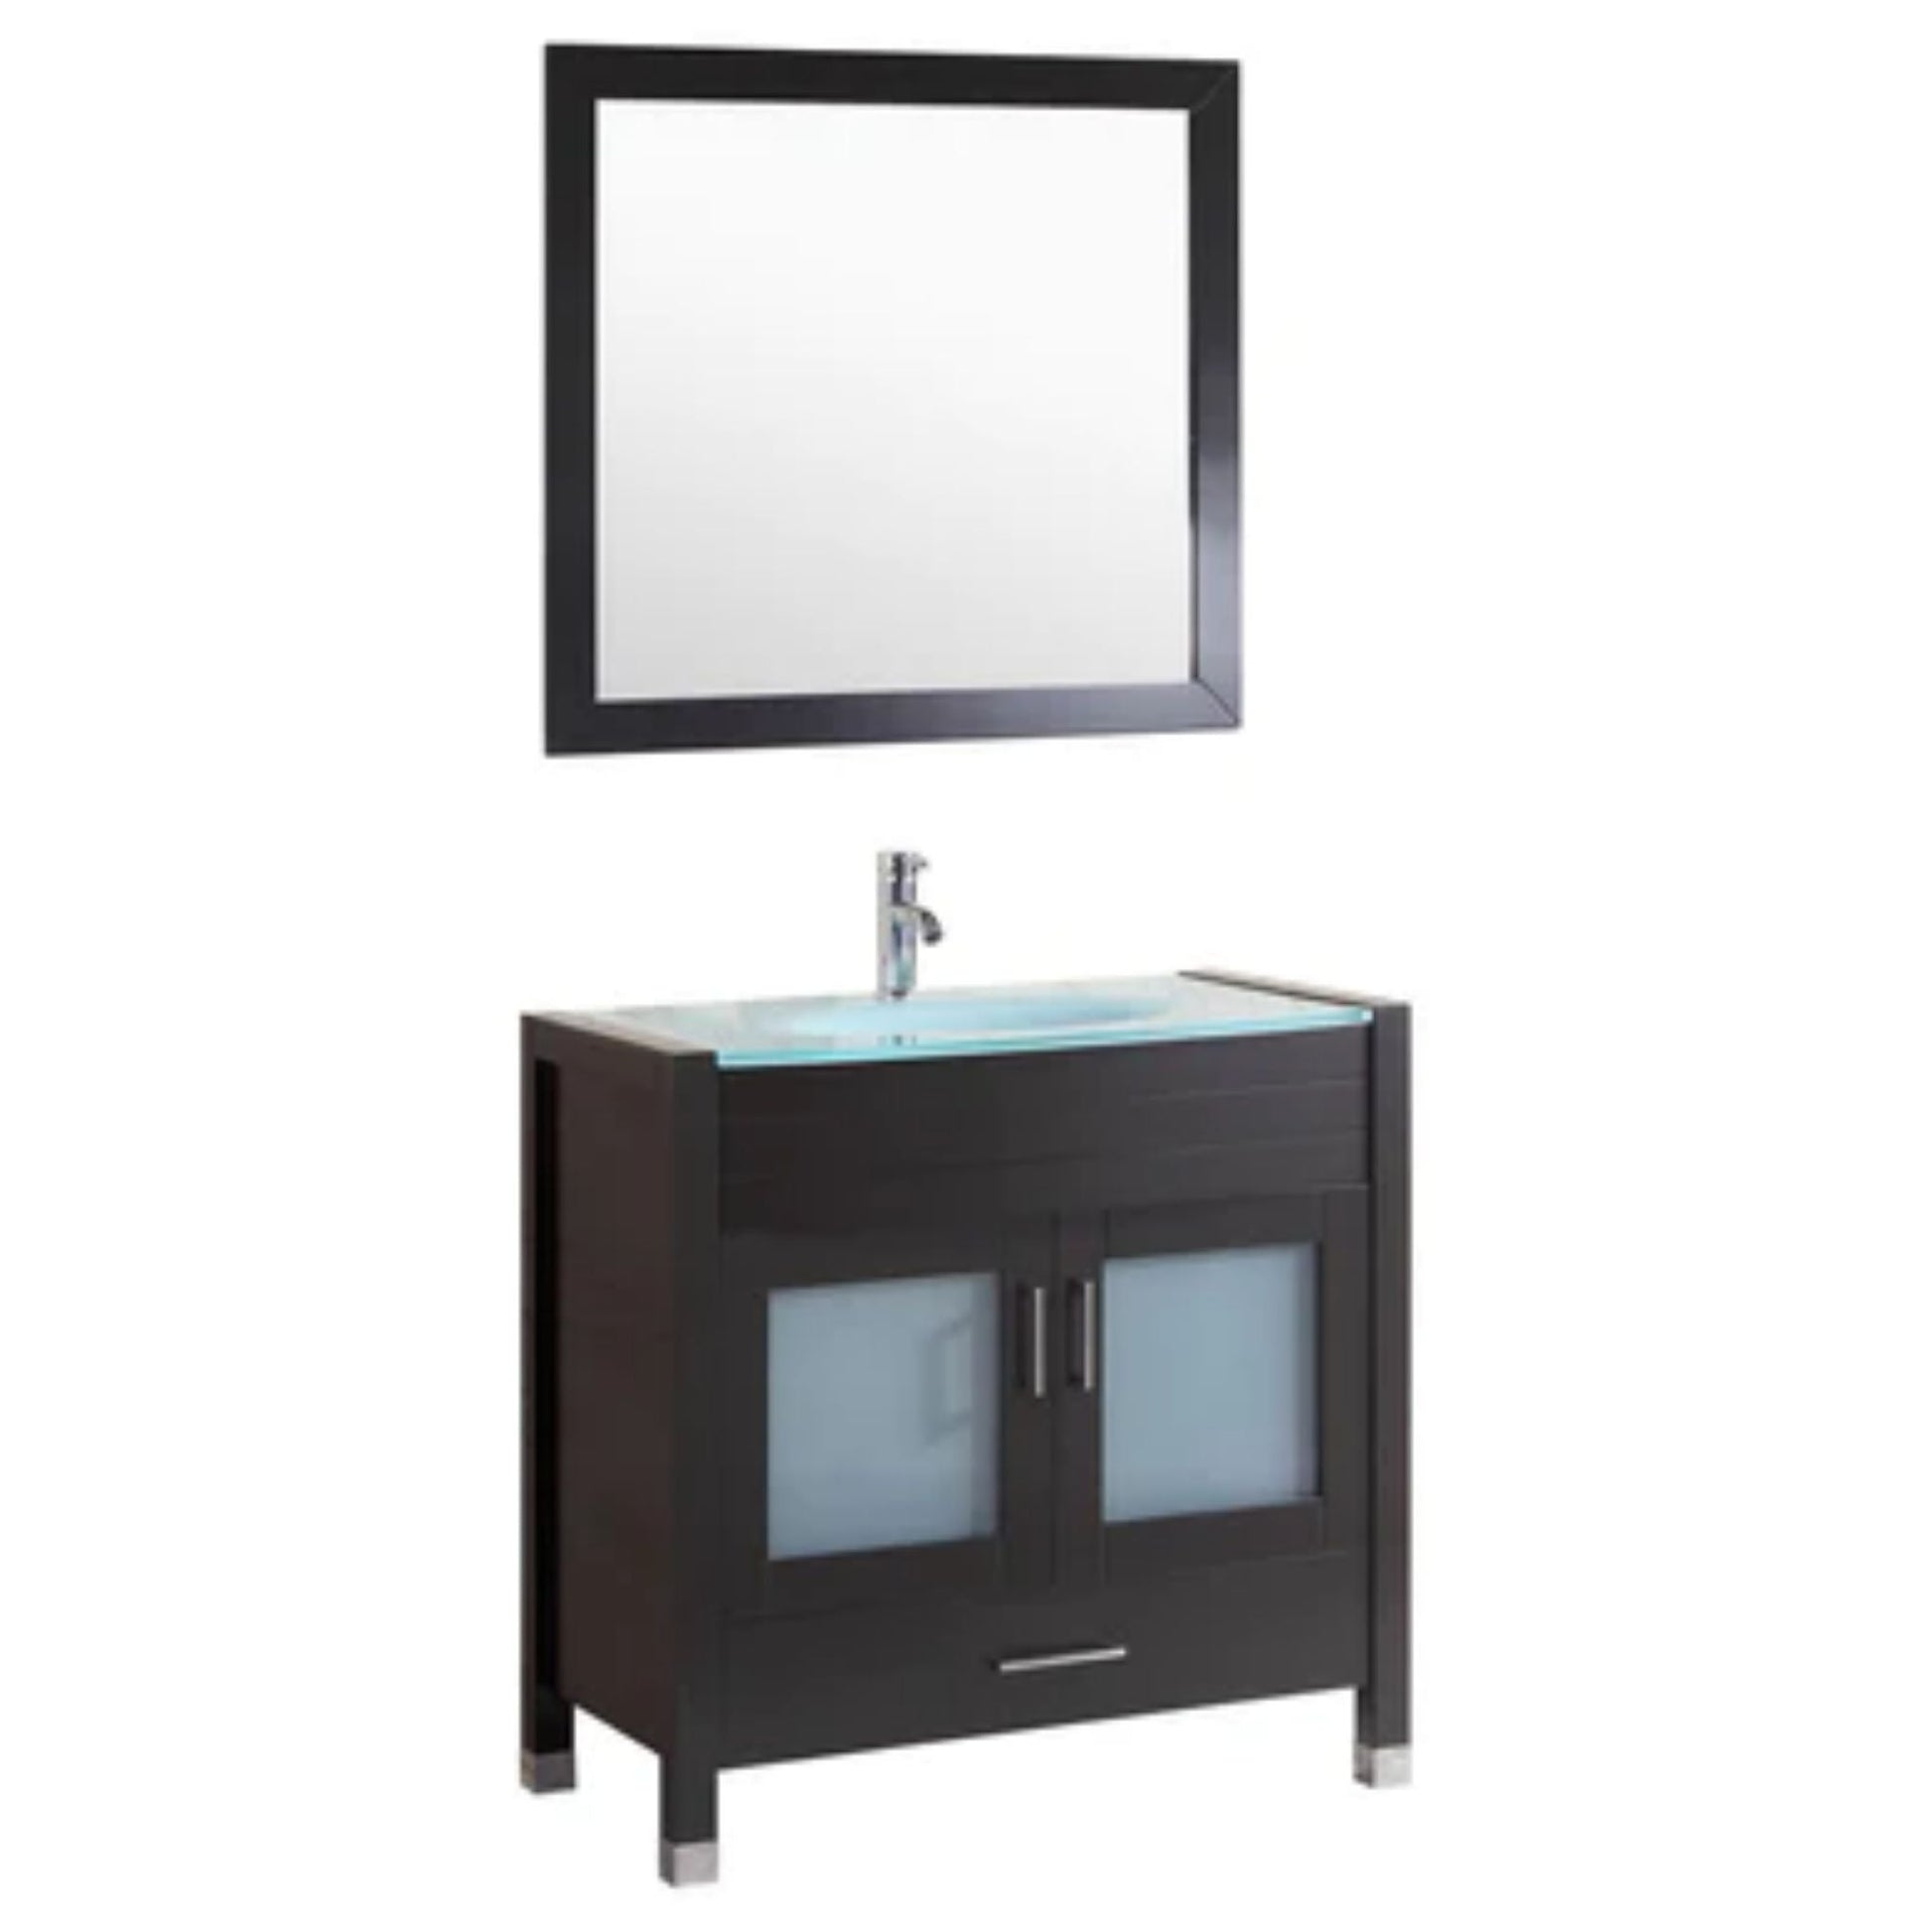 LessCare 36" Black Vanity Sink Base Cabinet with Mirror - Style 3